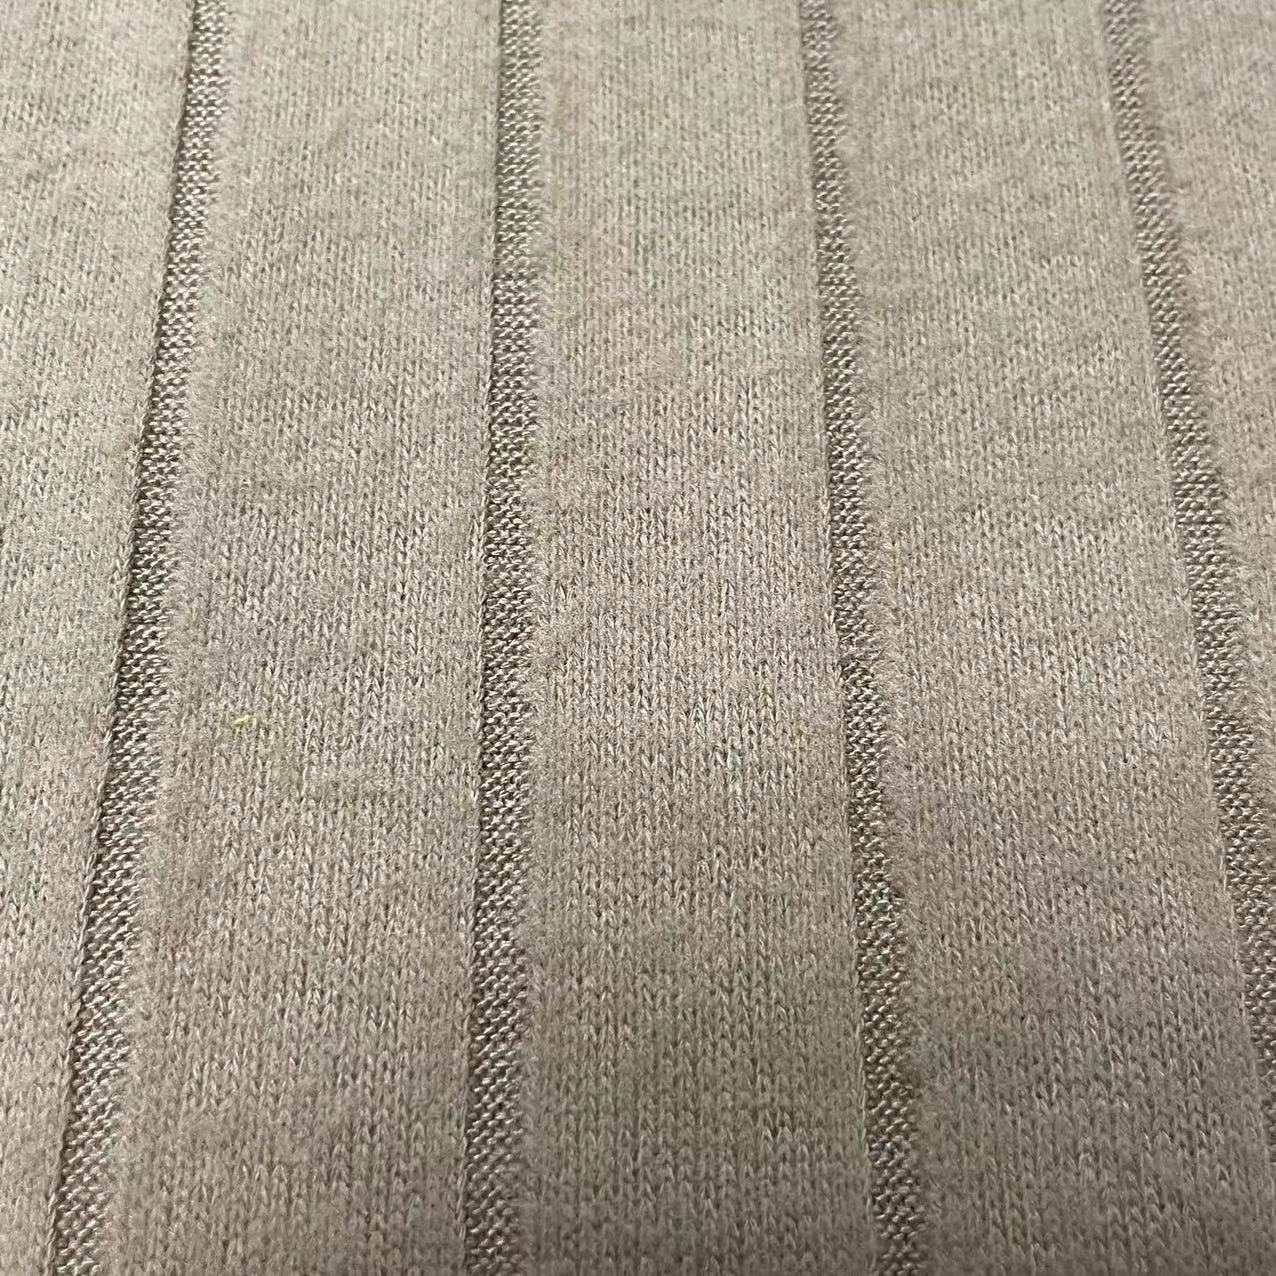 ribbed knitted fabrics